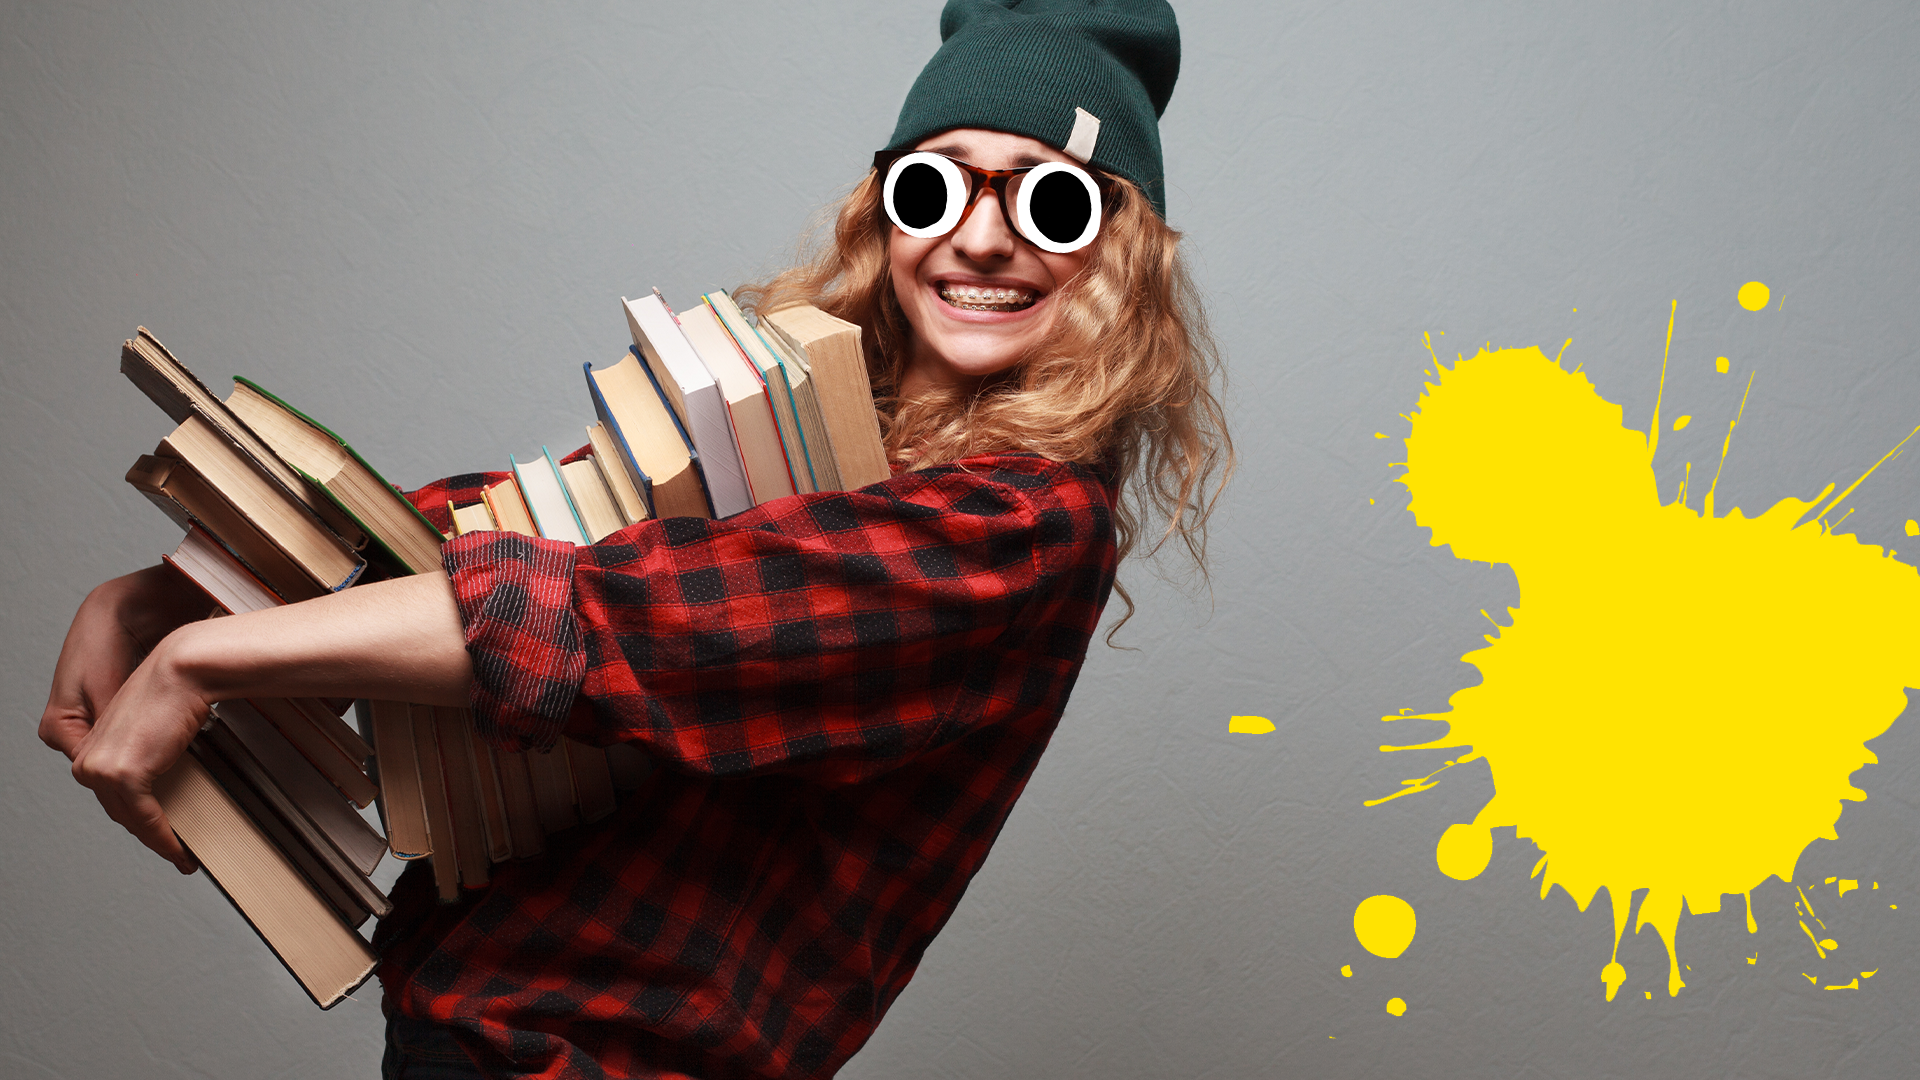 Girl with pile of books on grey background with splat